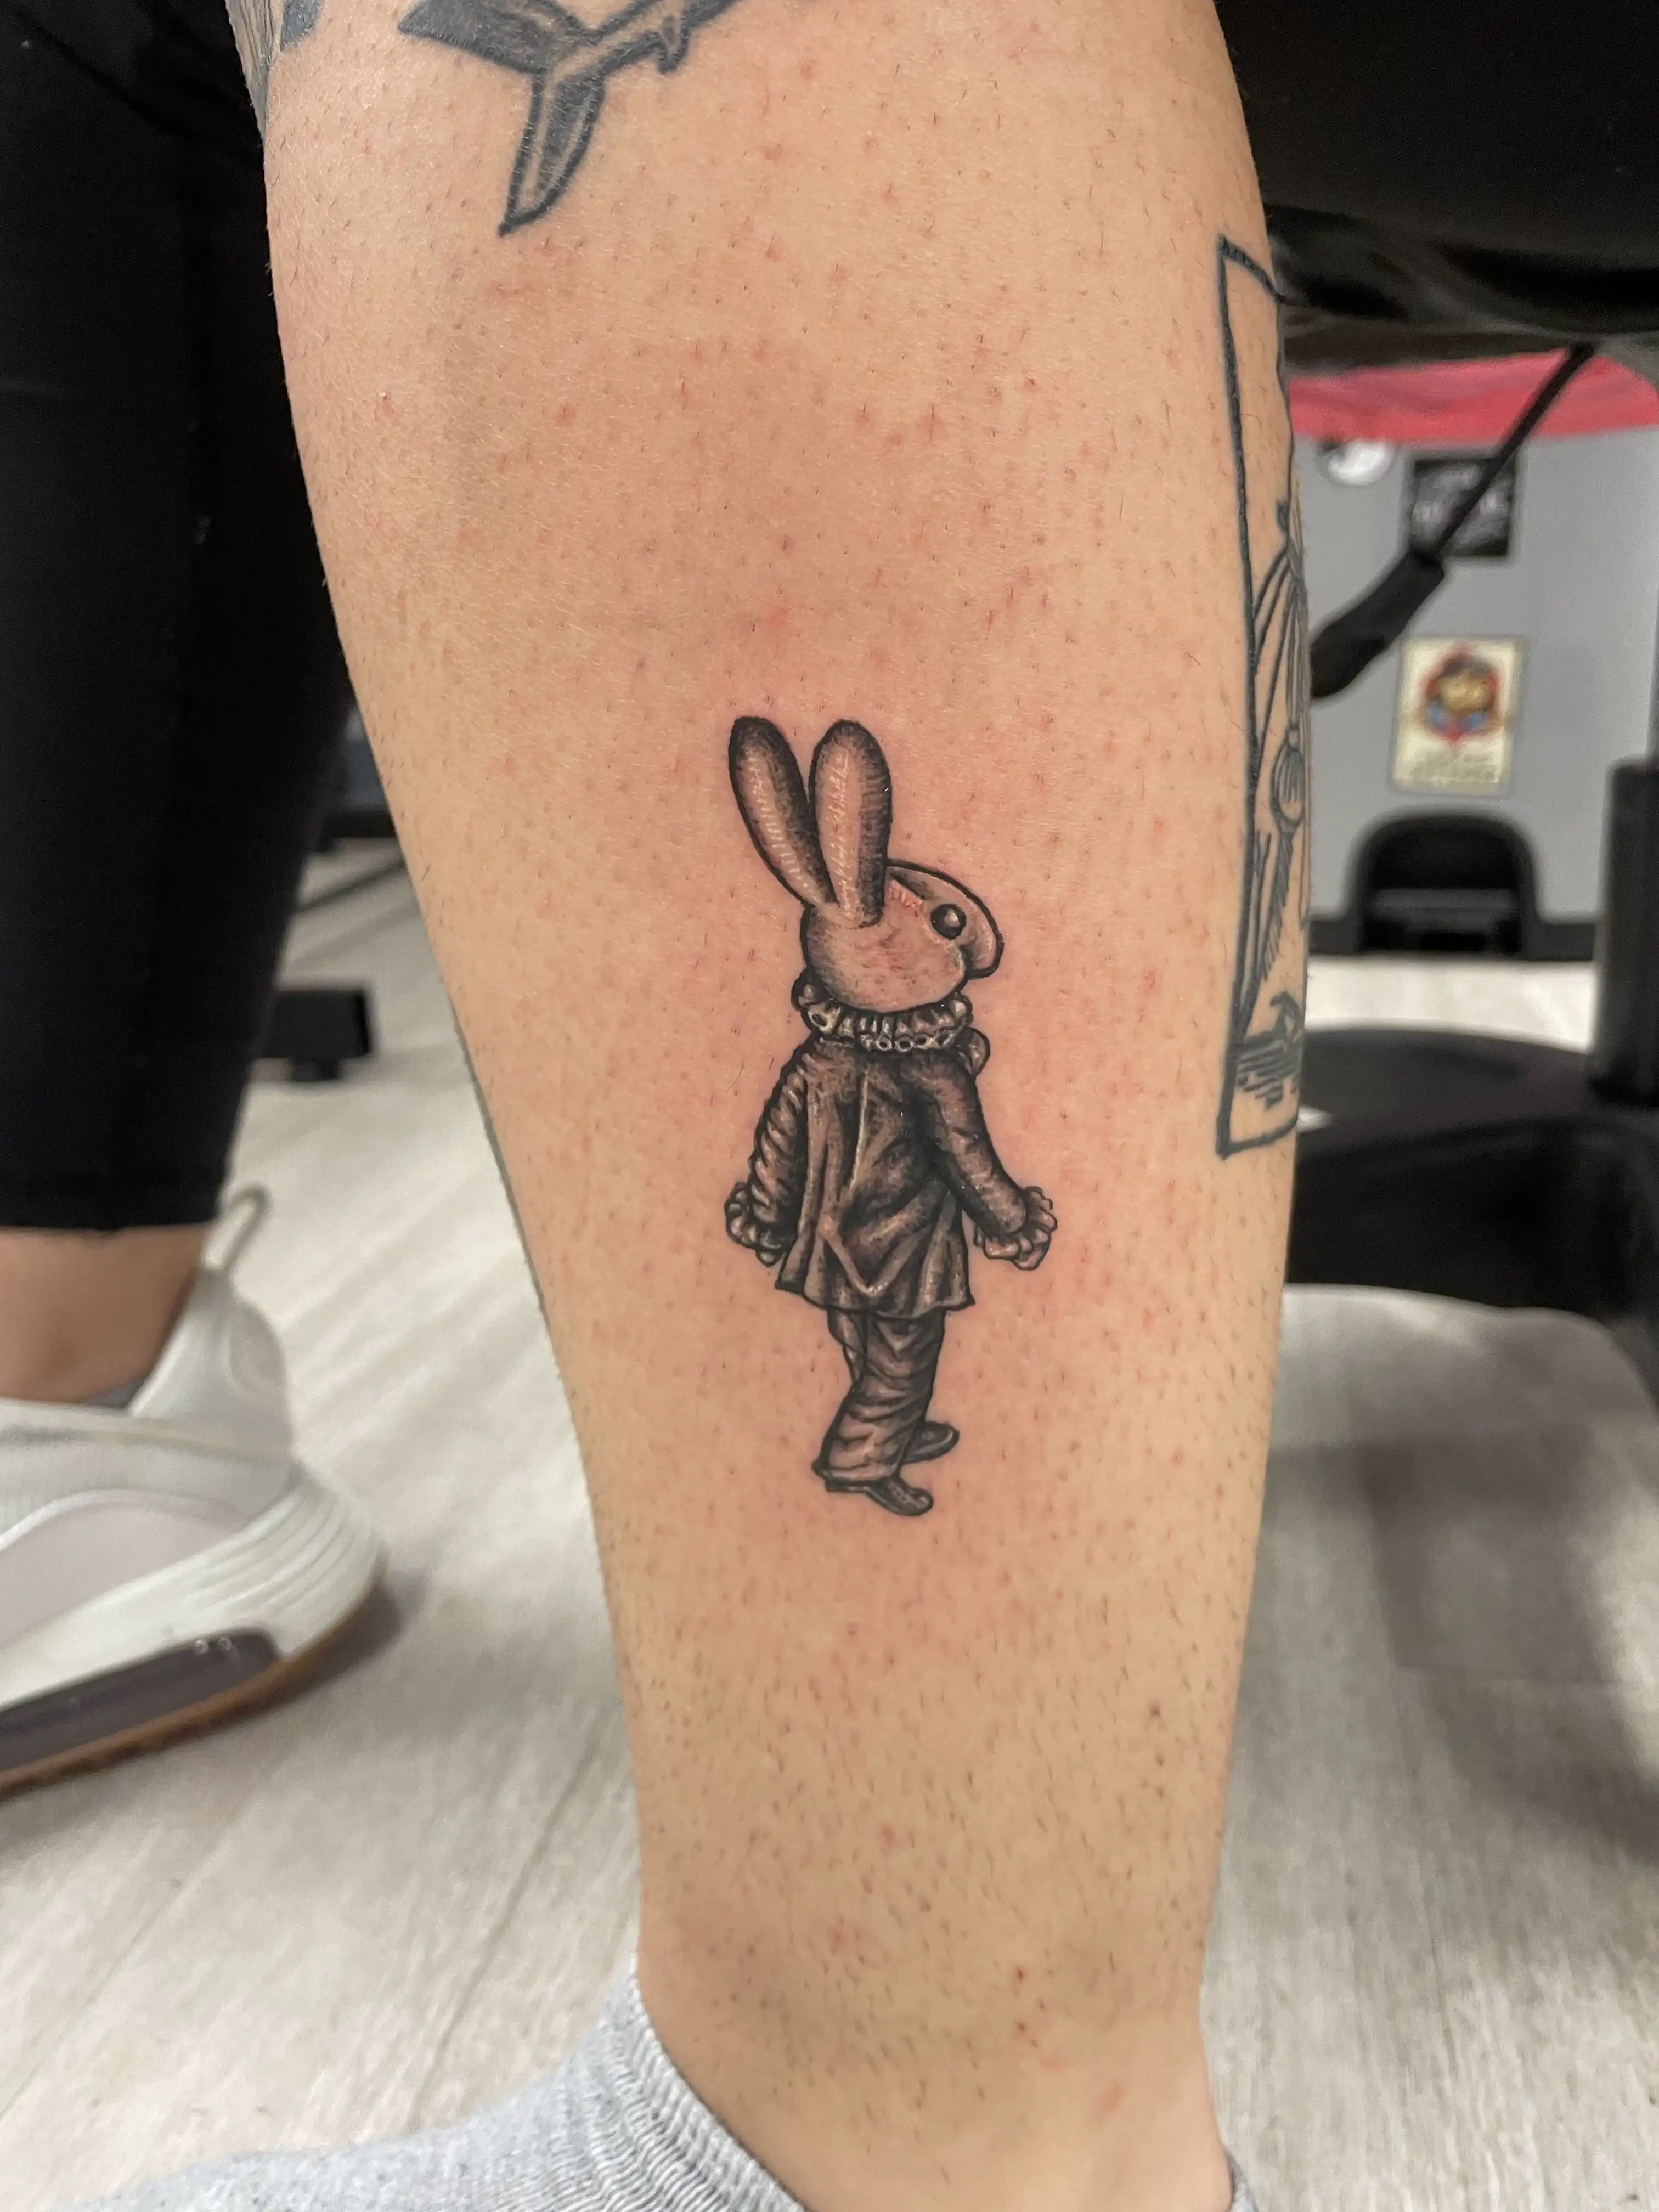 Amazing tattoo of rabbit in Fine Line Tattoos by Rorschach Tattoo Shop and Piercing Studio and Milk District Tattoo Shop Near Me